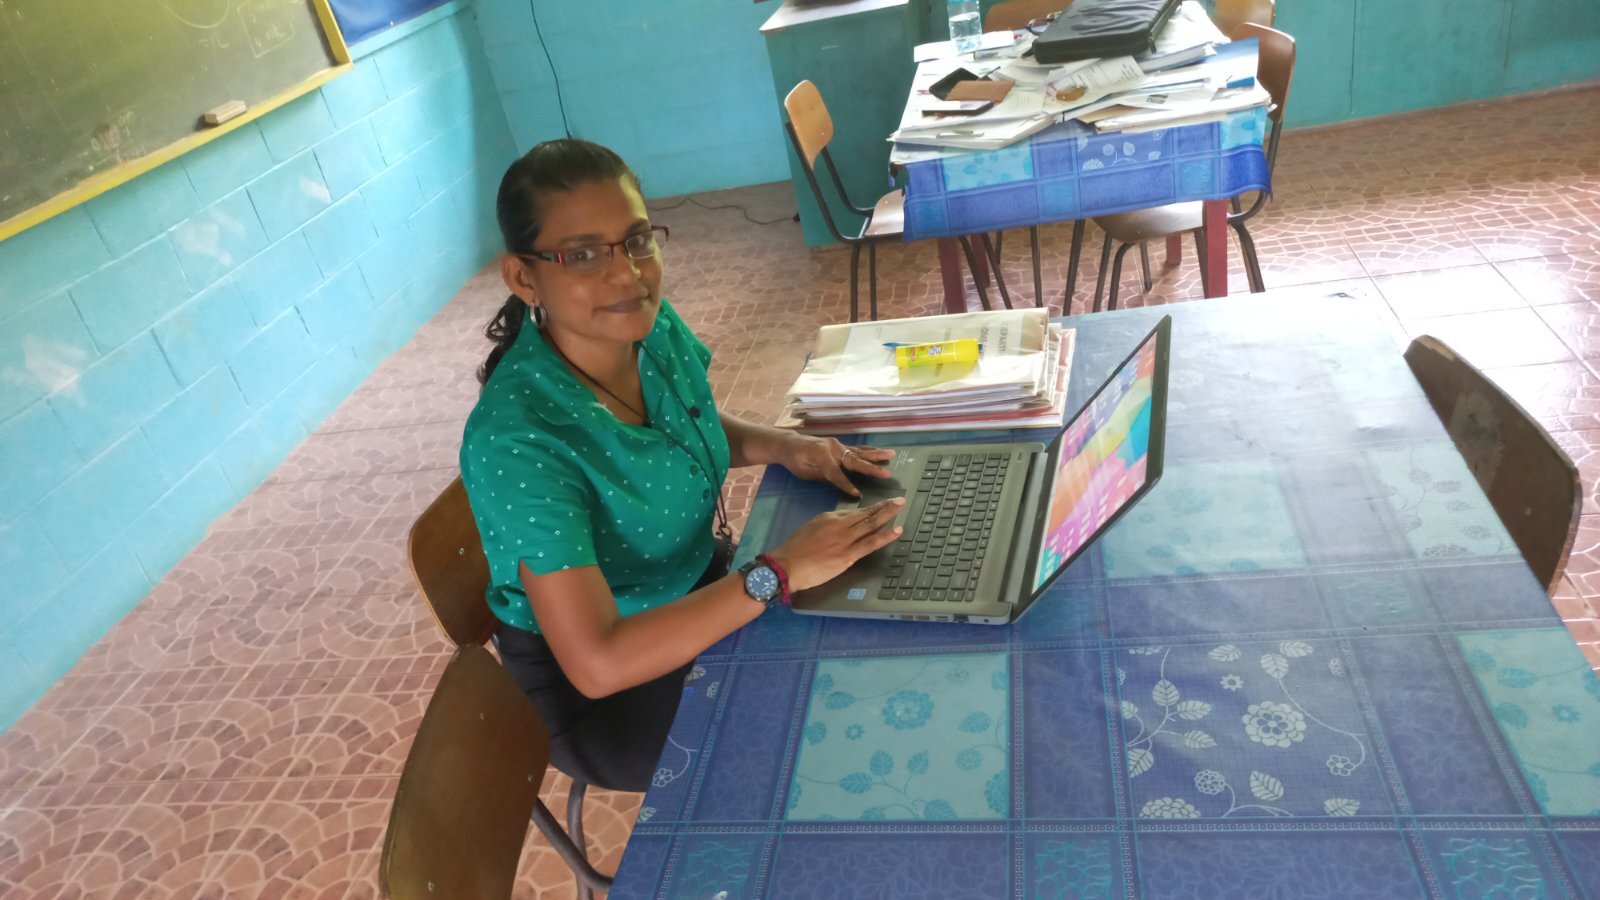 Woman smiling while using laptop computer